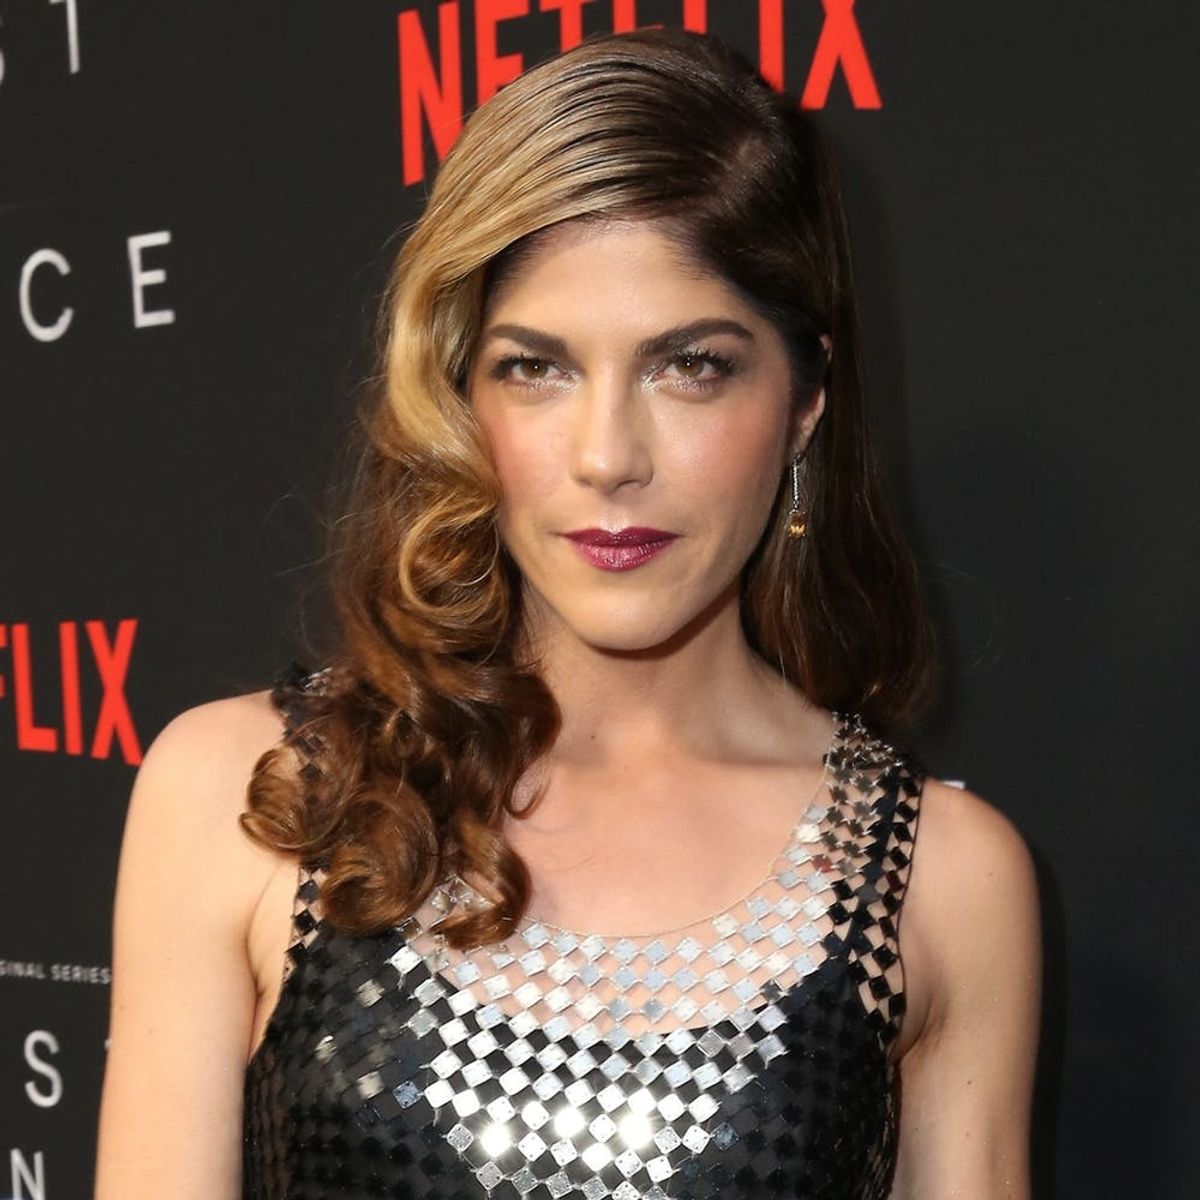 Selma Blair Celebrates Two Years of Sobriety in a Personal Post